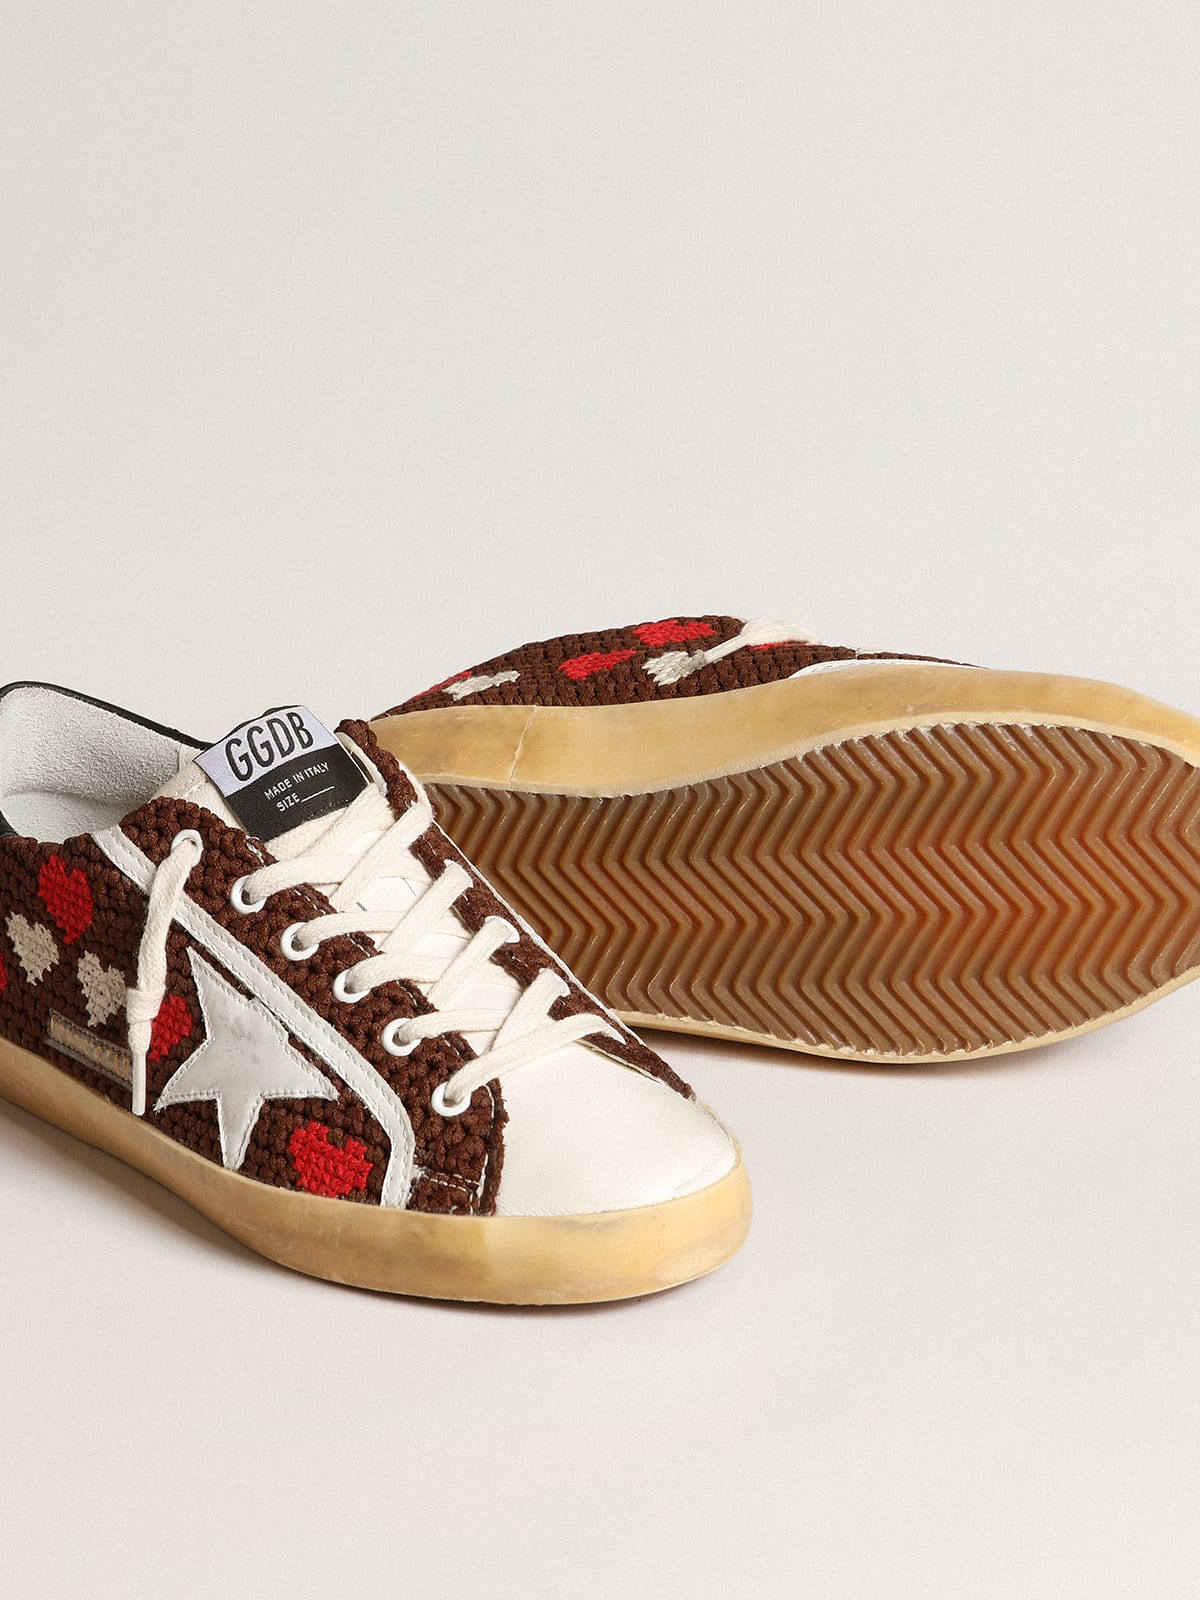 Golden Goose - Super-Star in brown crochet with embroidered hearts and white star in 